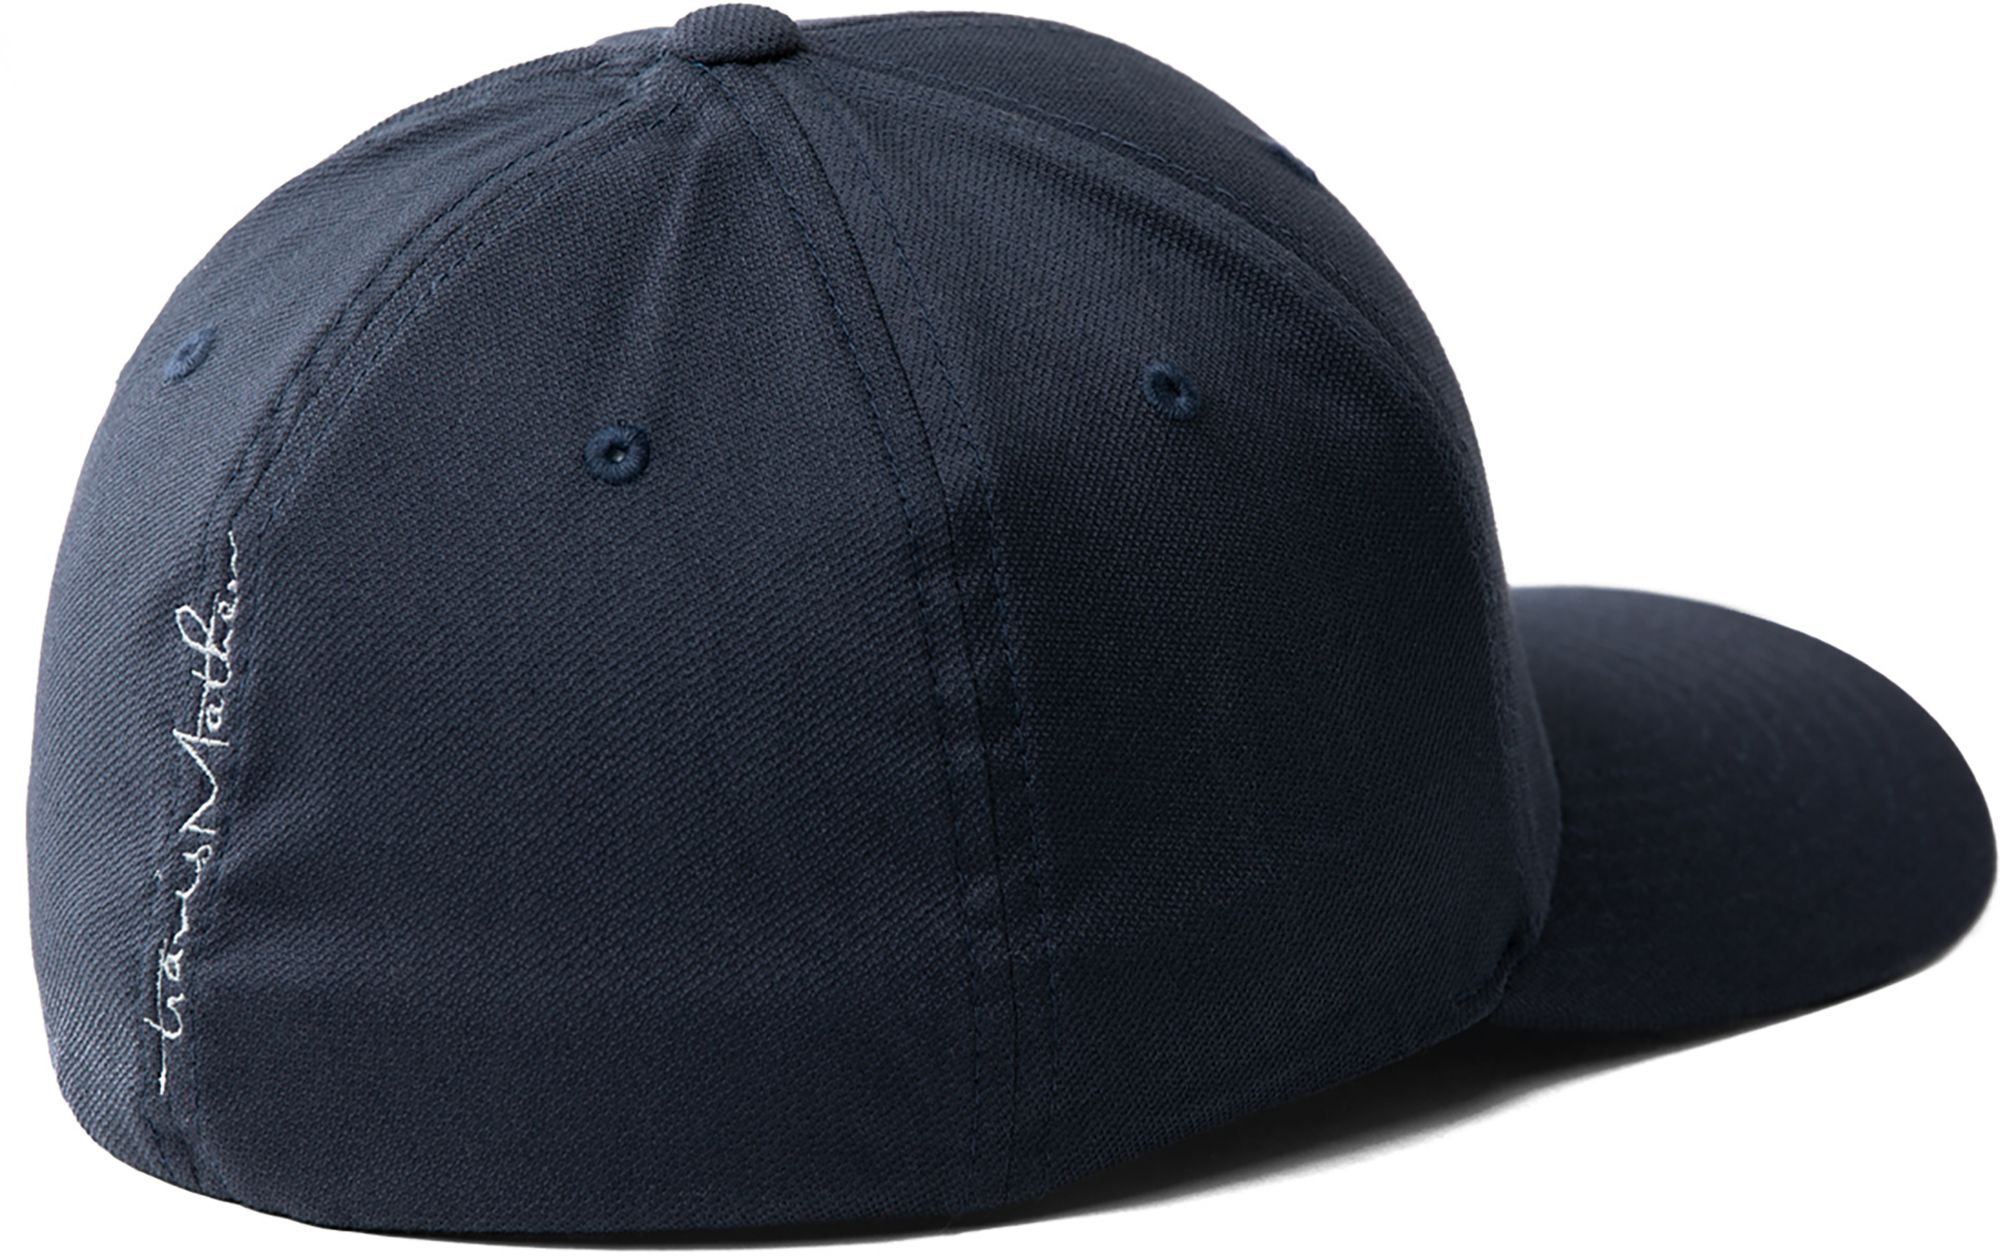 TravisMathew Men's Oh For Sure Fitted Golf Hat